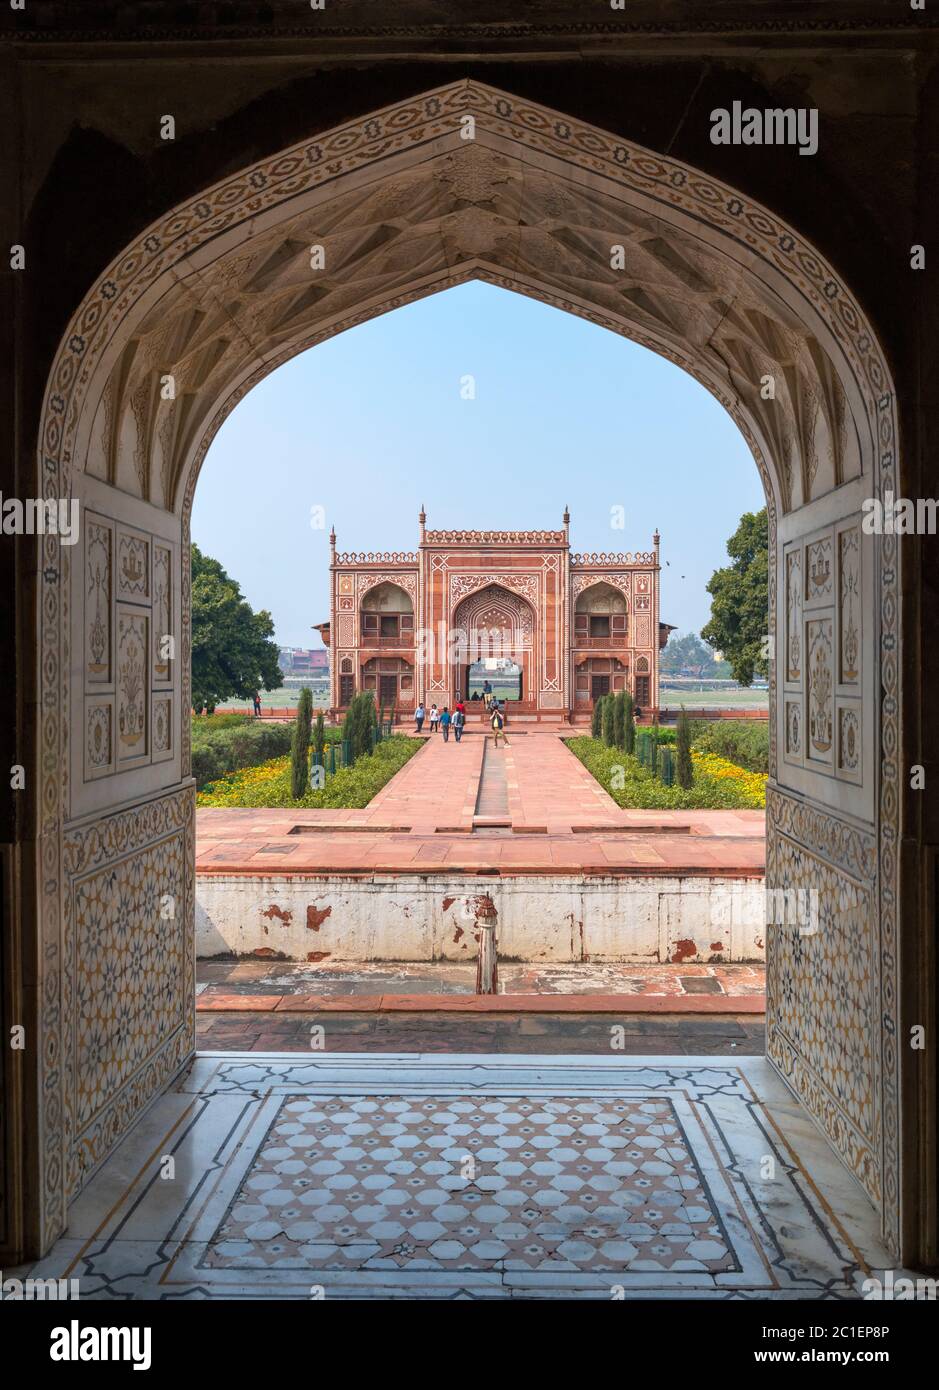 View from the Tomb of Itmad-ud-Daulah (I'timād-ud-Daulah), also known as "Baby Taj", a Mughal mausoleum in the city of Agra, Uttar Pradesh, India Stock Photo